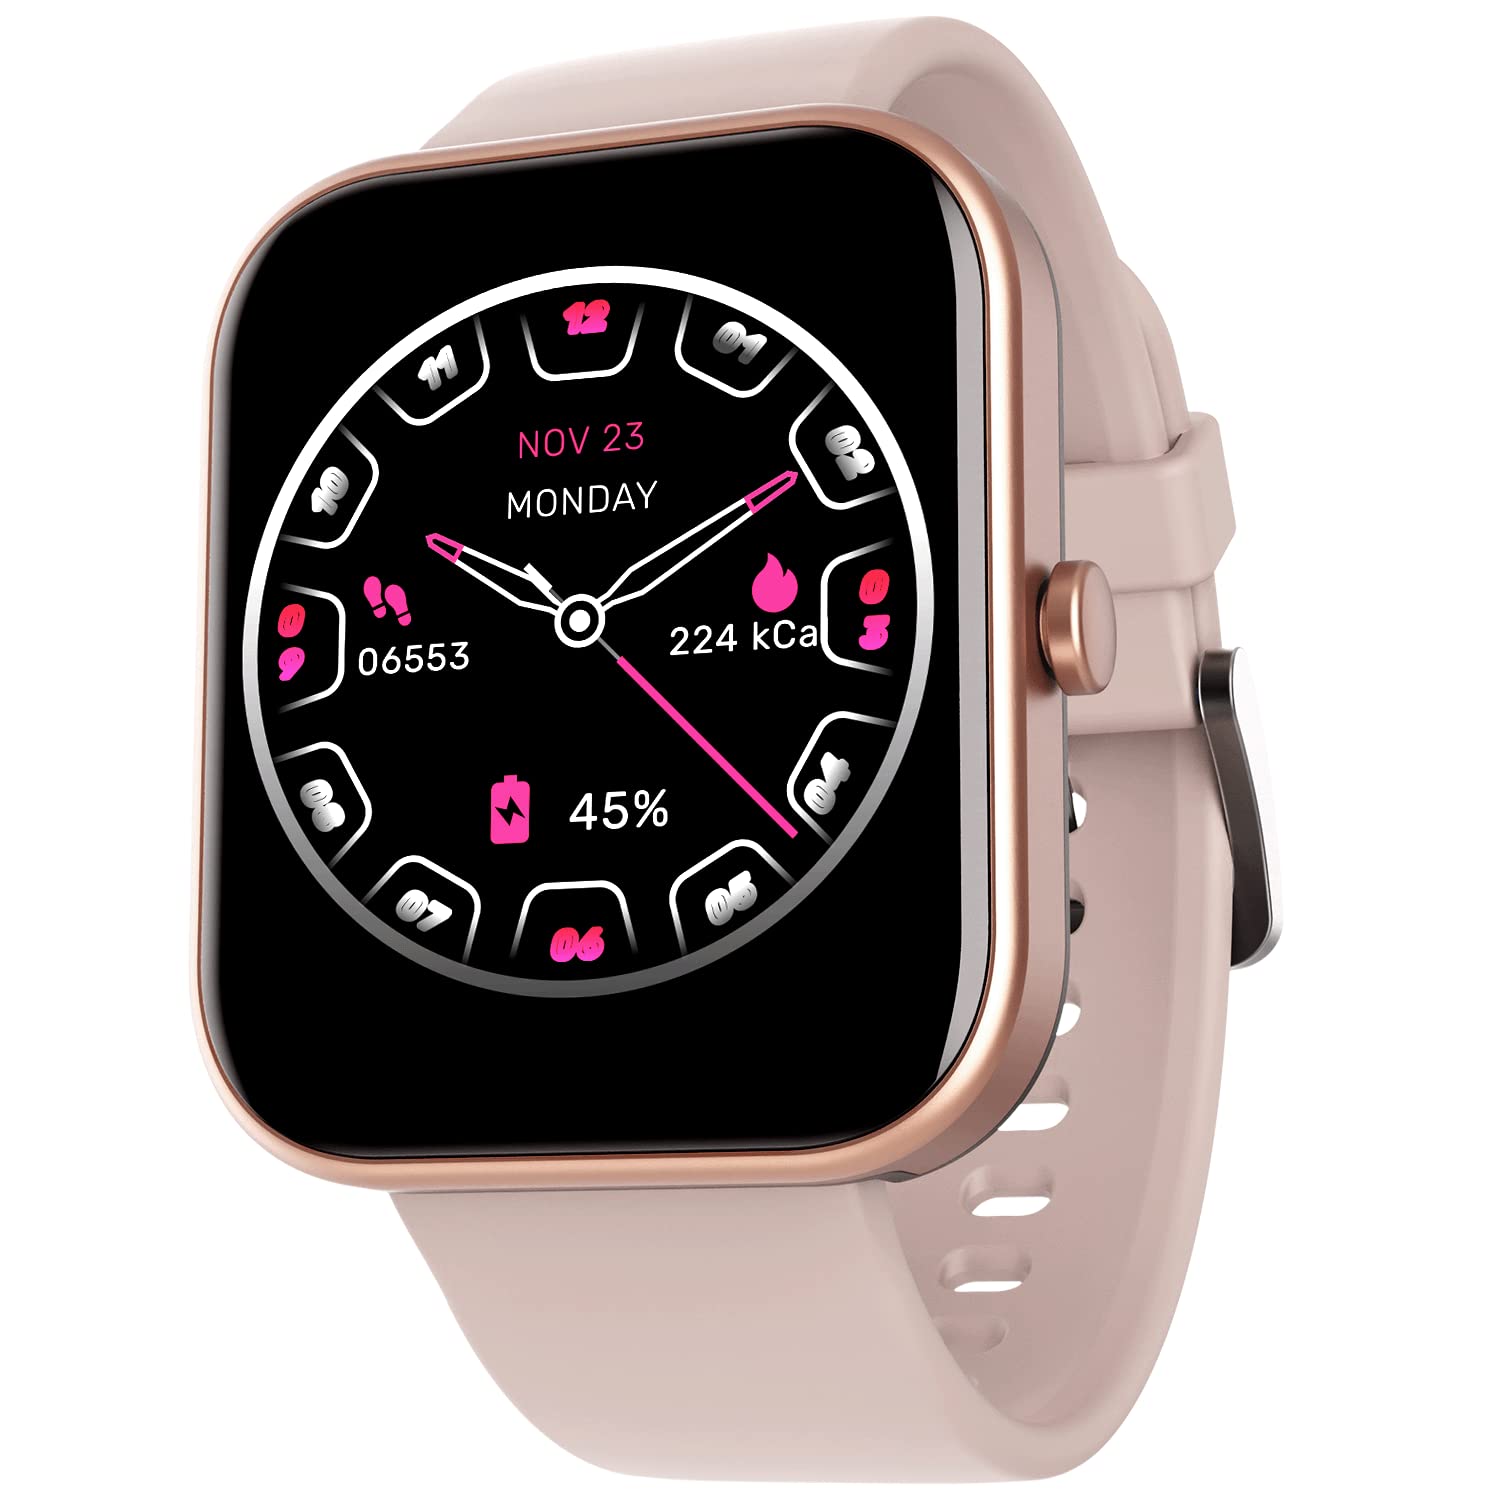 boAt Newly Launched Wave Electra with 1.81" HD Display, Smart Calling Ultra-Seamless BT Calling Chip, 20 Built-in Watch Faces, 100 + Sports Modes, Menu Personalization, in-Built Games(Cherry Blossom)